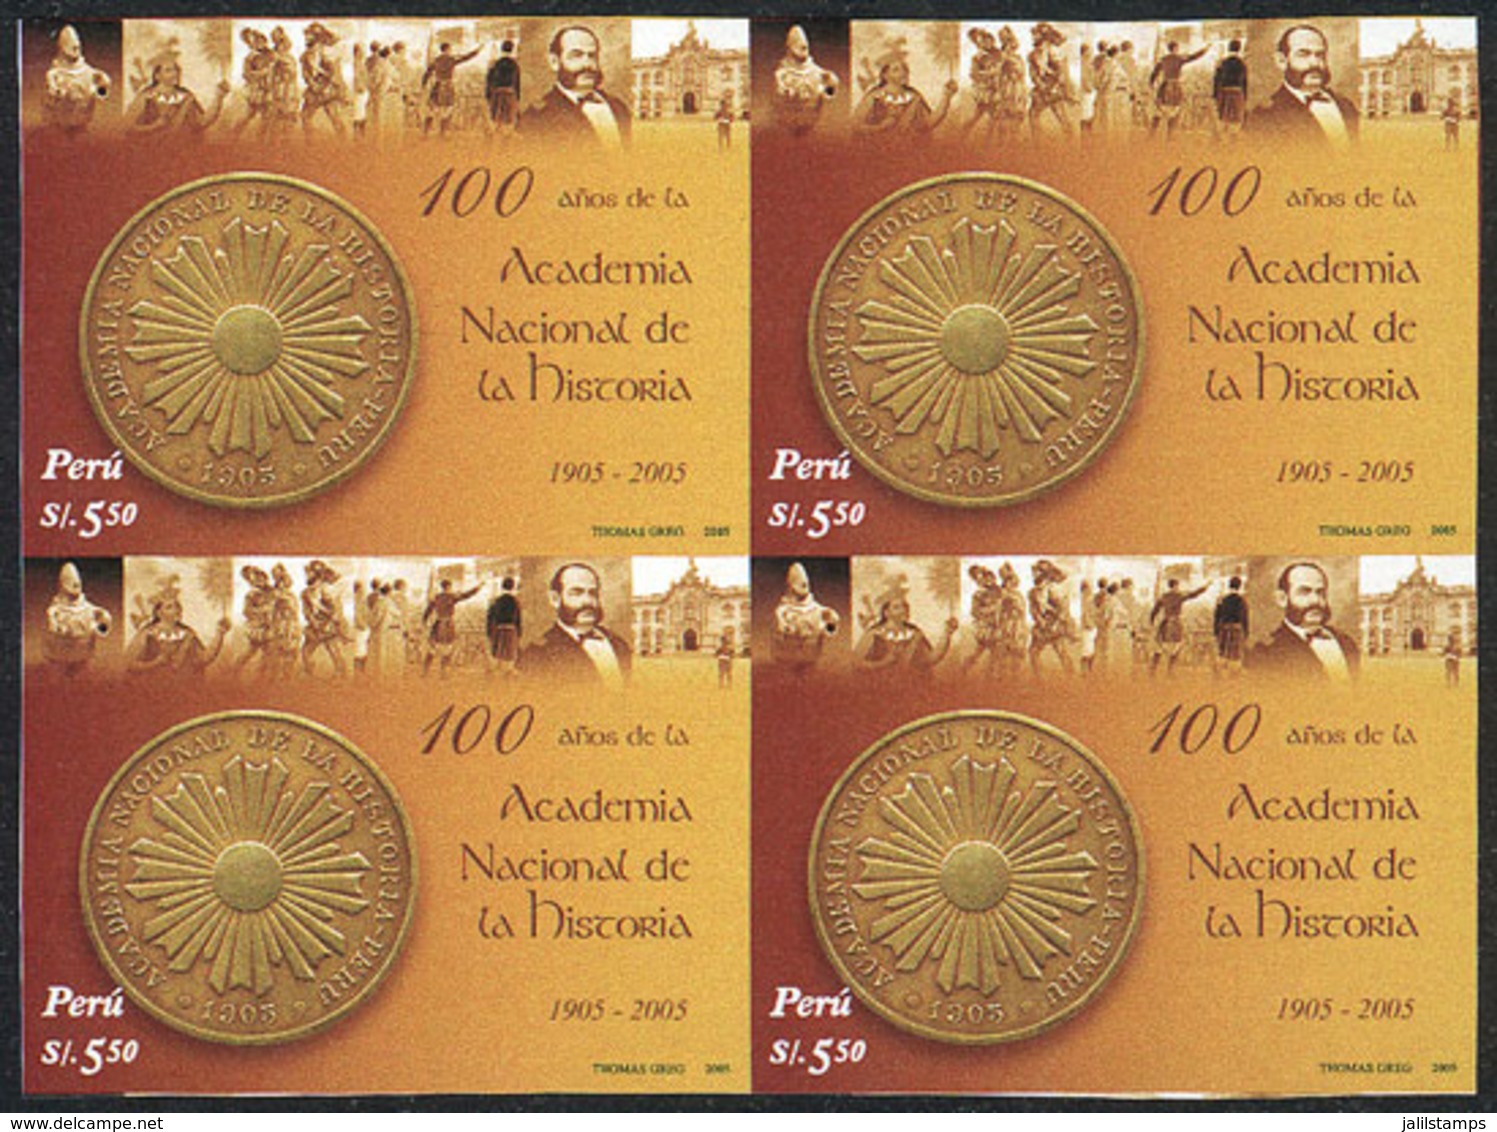 1661 PERU: Sc.1492, 2006 National Academy Of History, IMPERFORATE BLOCK OF 4, Excellent Quality, Rare! - Peru